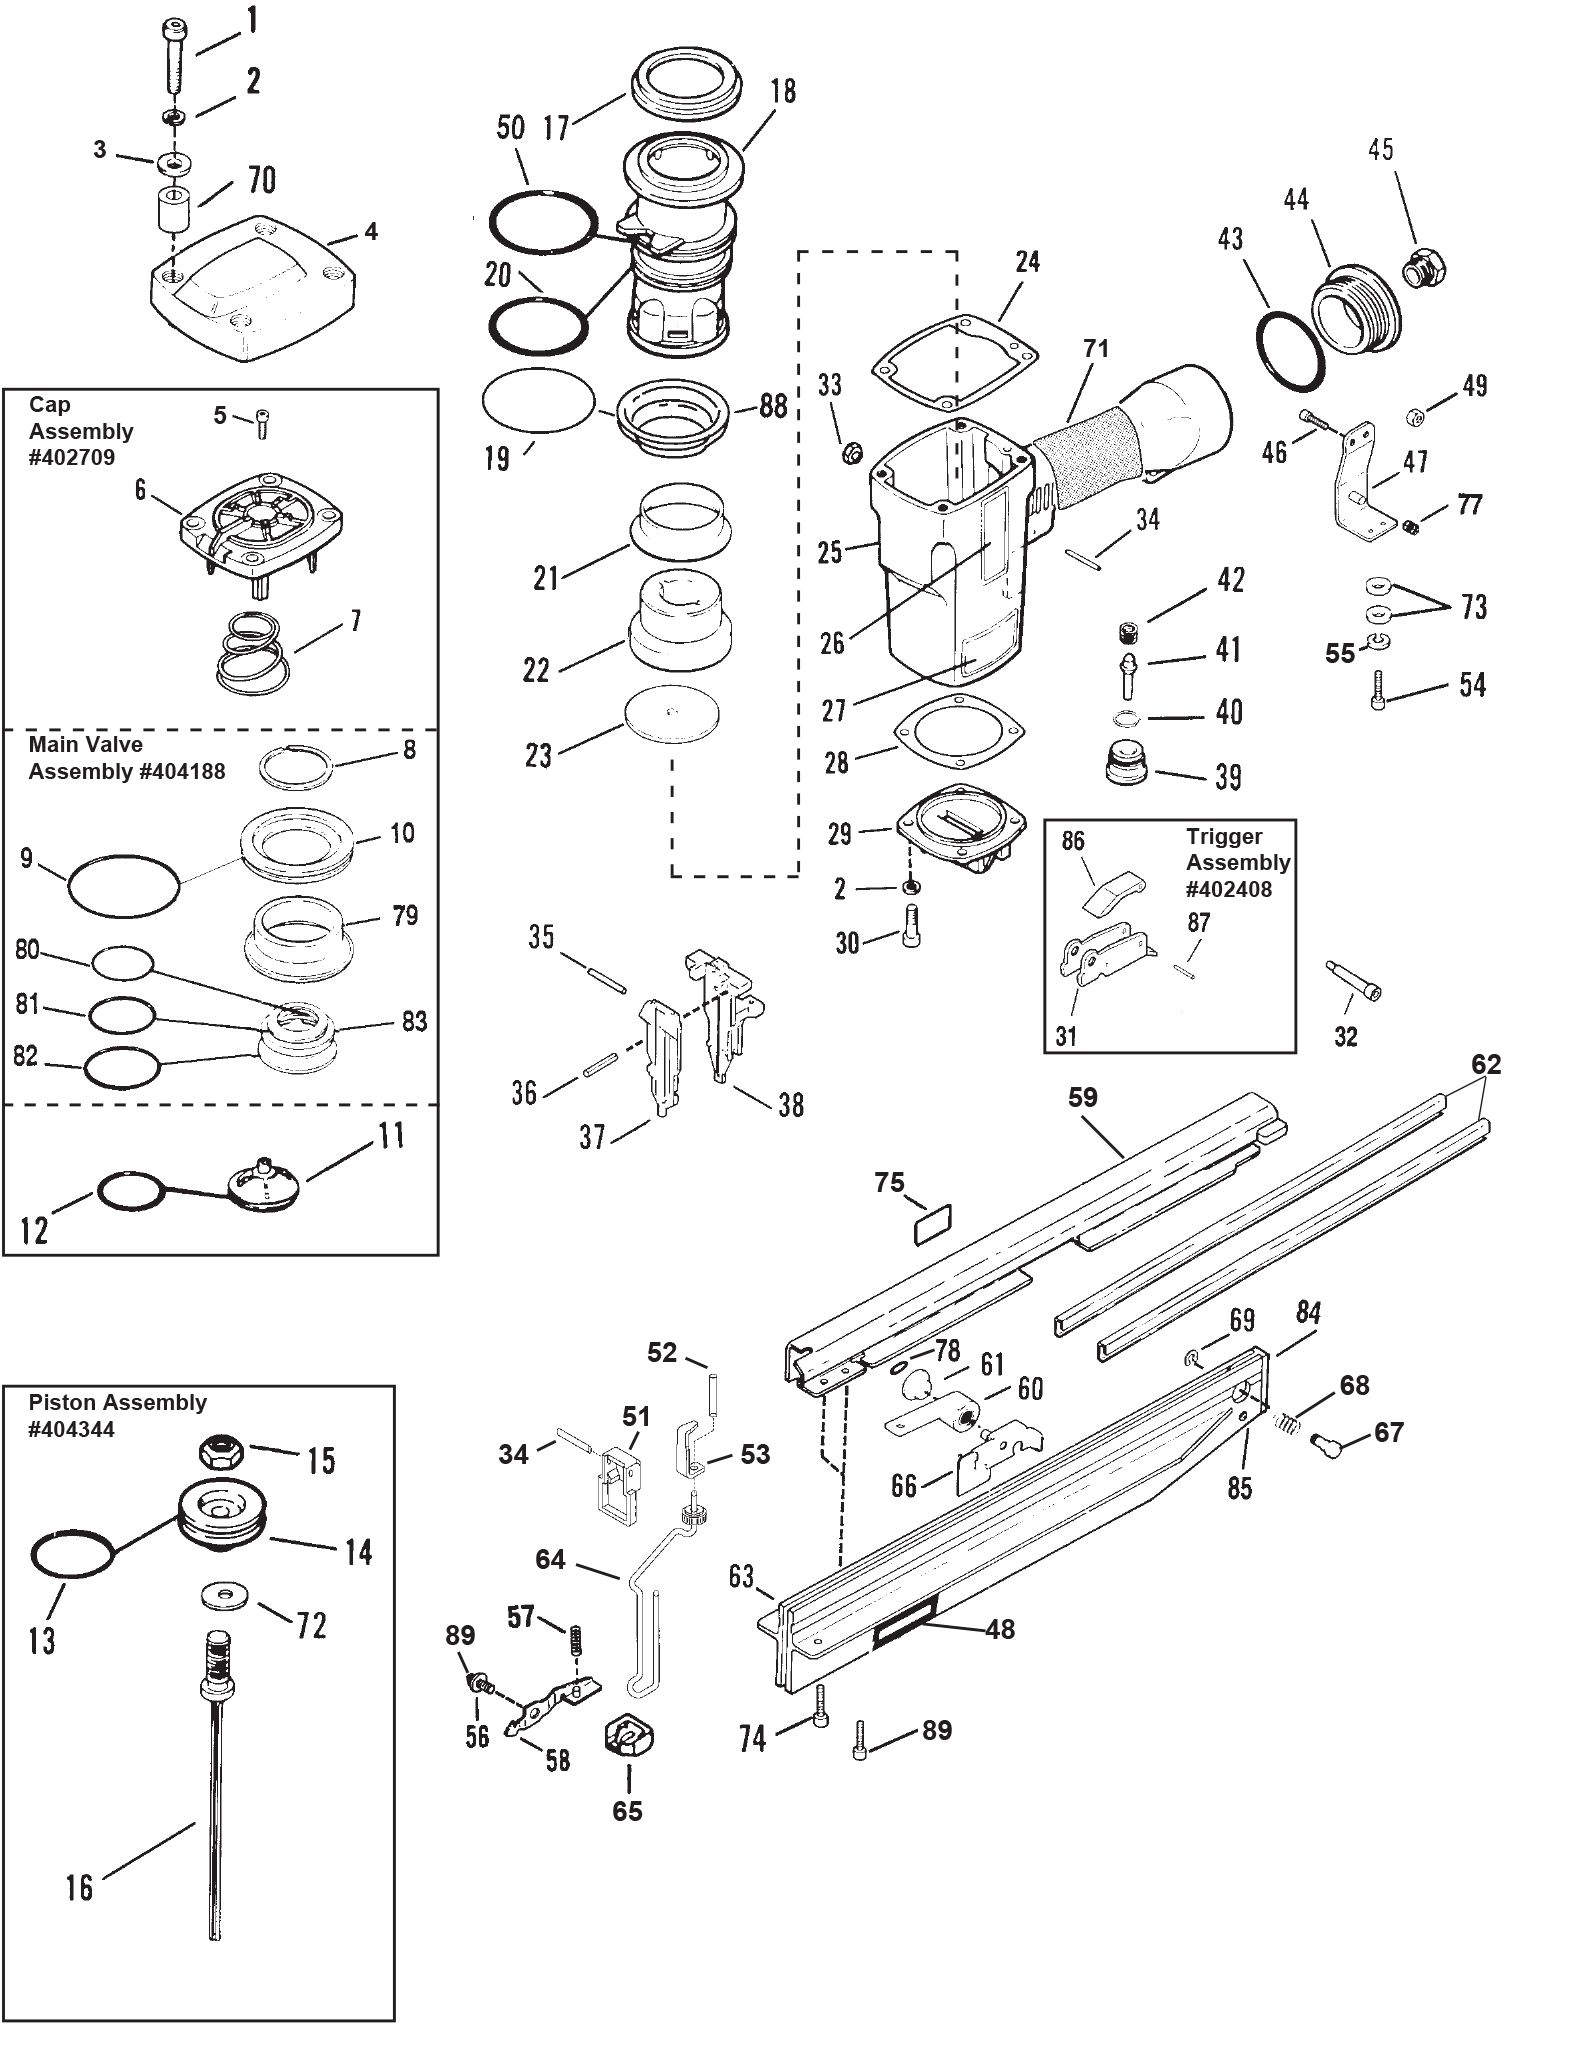 Paslode IM45GN Parts Diagram and Manual | L&S Engineers